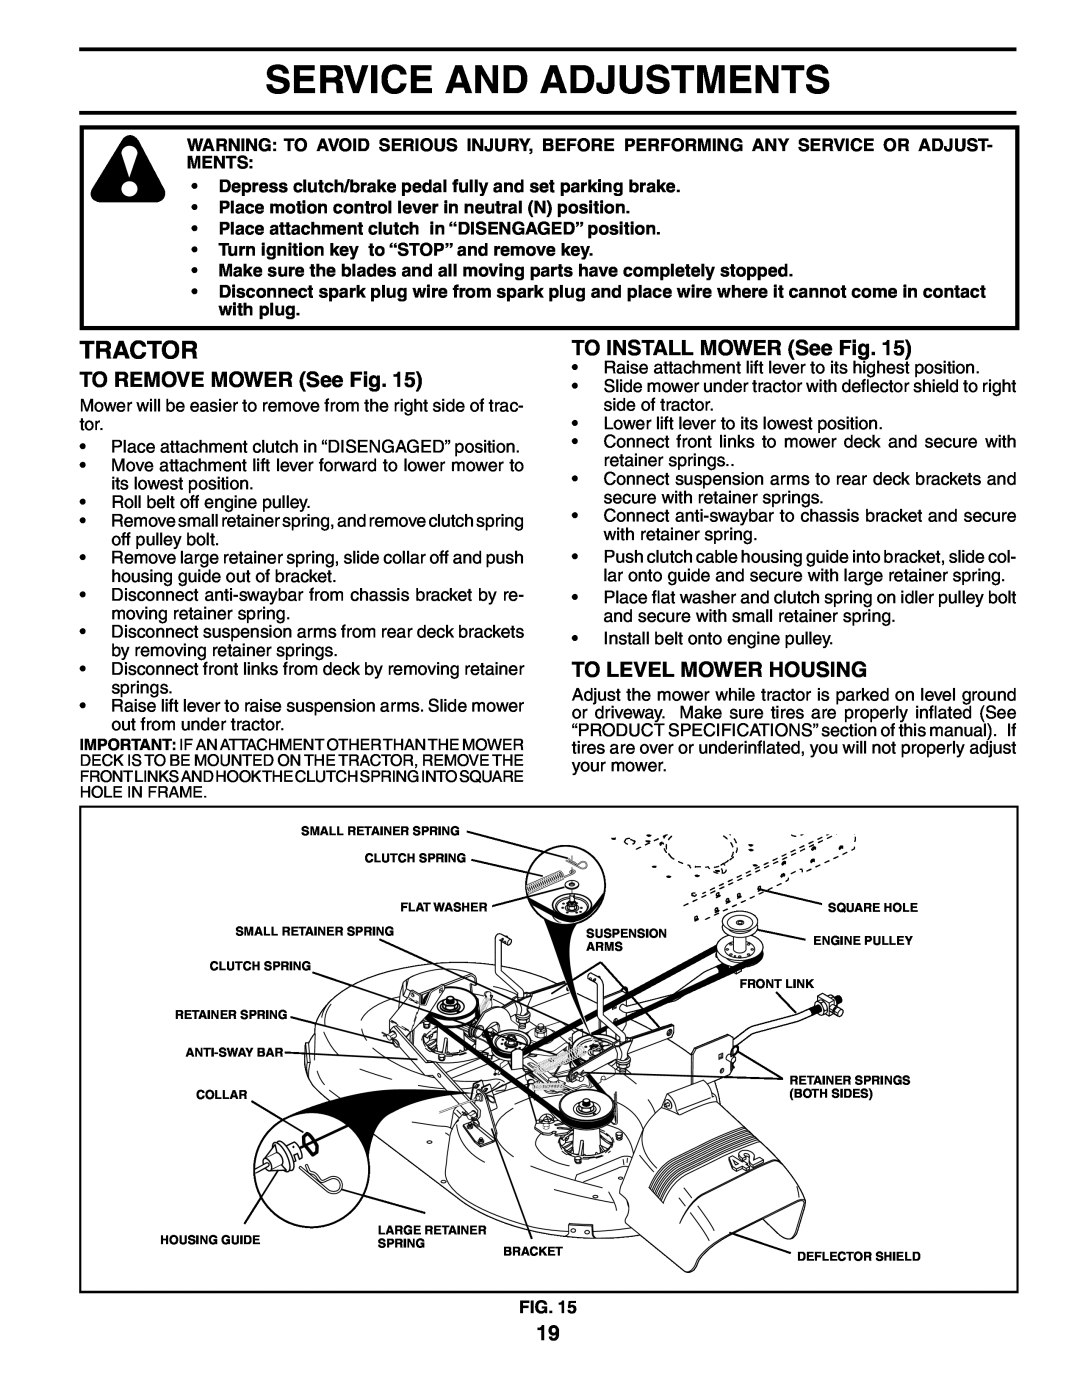 Ryobi 197788 Service And Adjustments, TO REMOVE MOWER See Fig, TO INSTALL MOWER See Fig, To Level Mower Housing, Tractor 